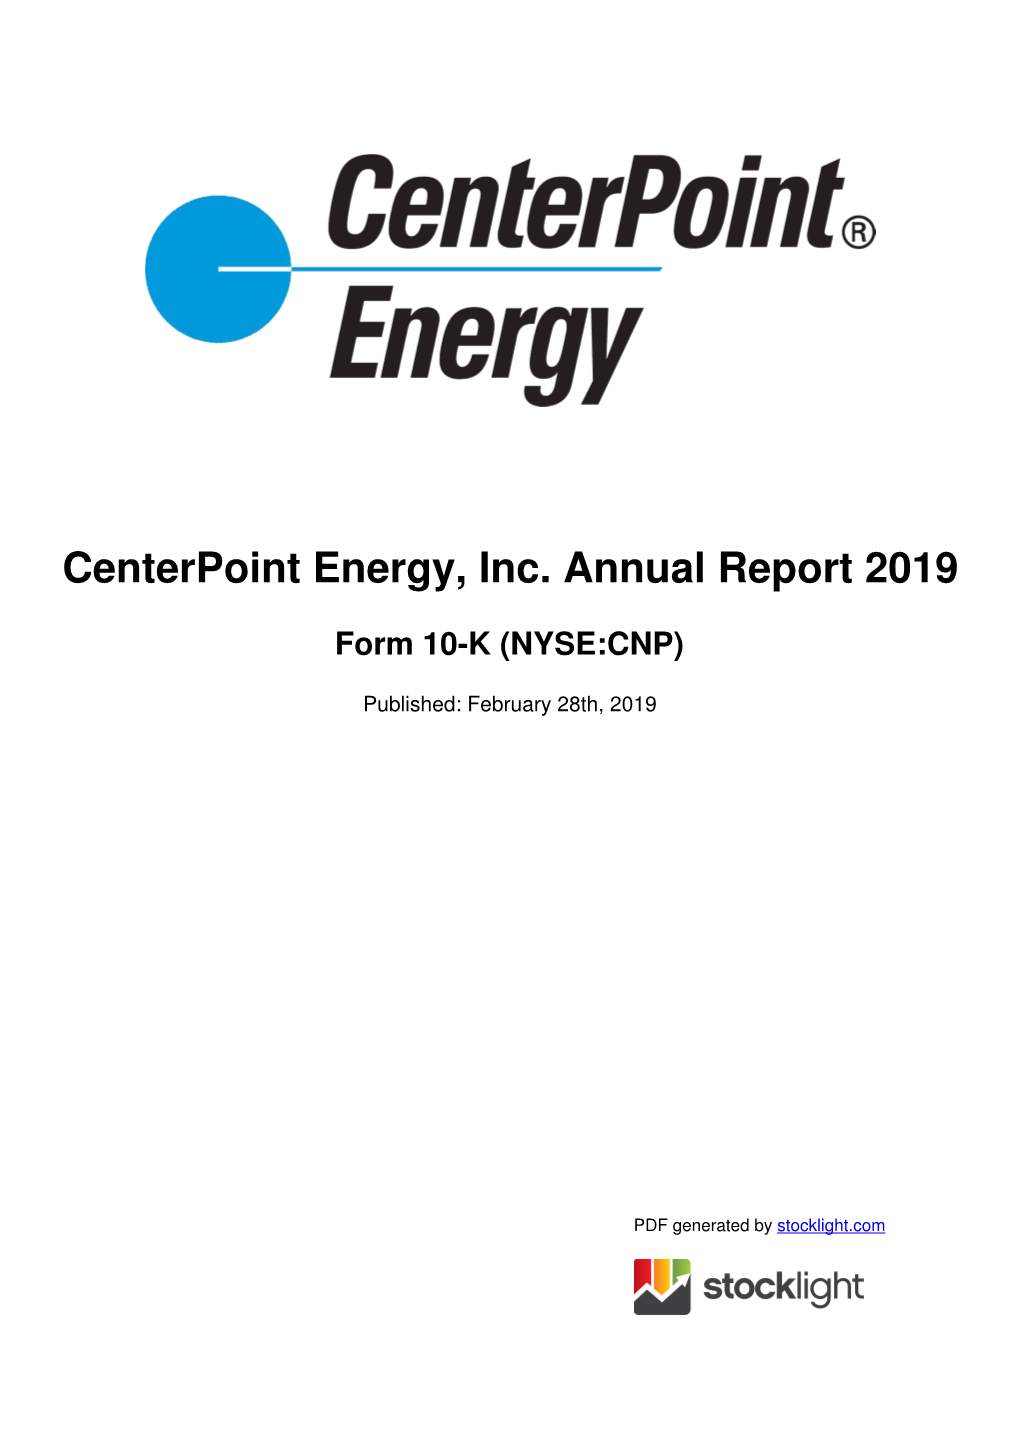 Centerpoint Energy, Inc. Annual Report 2019